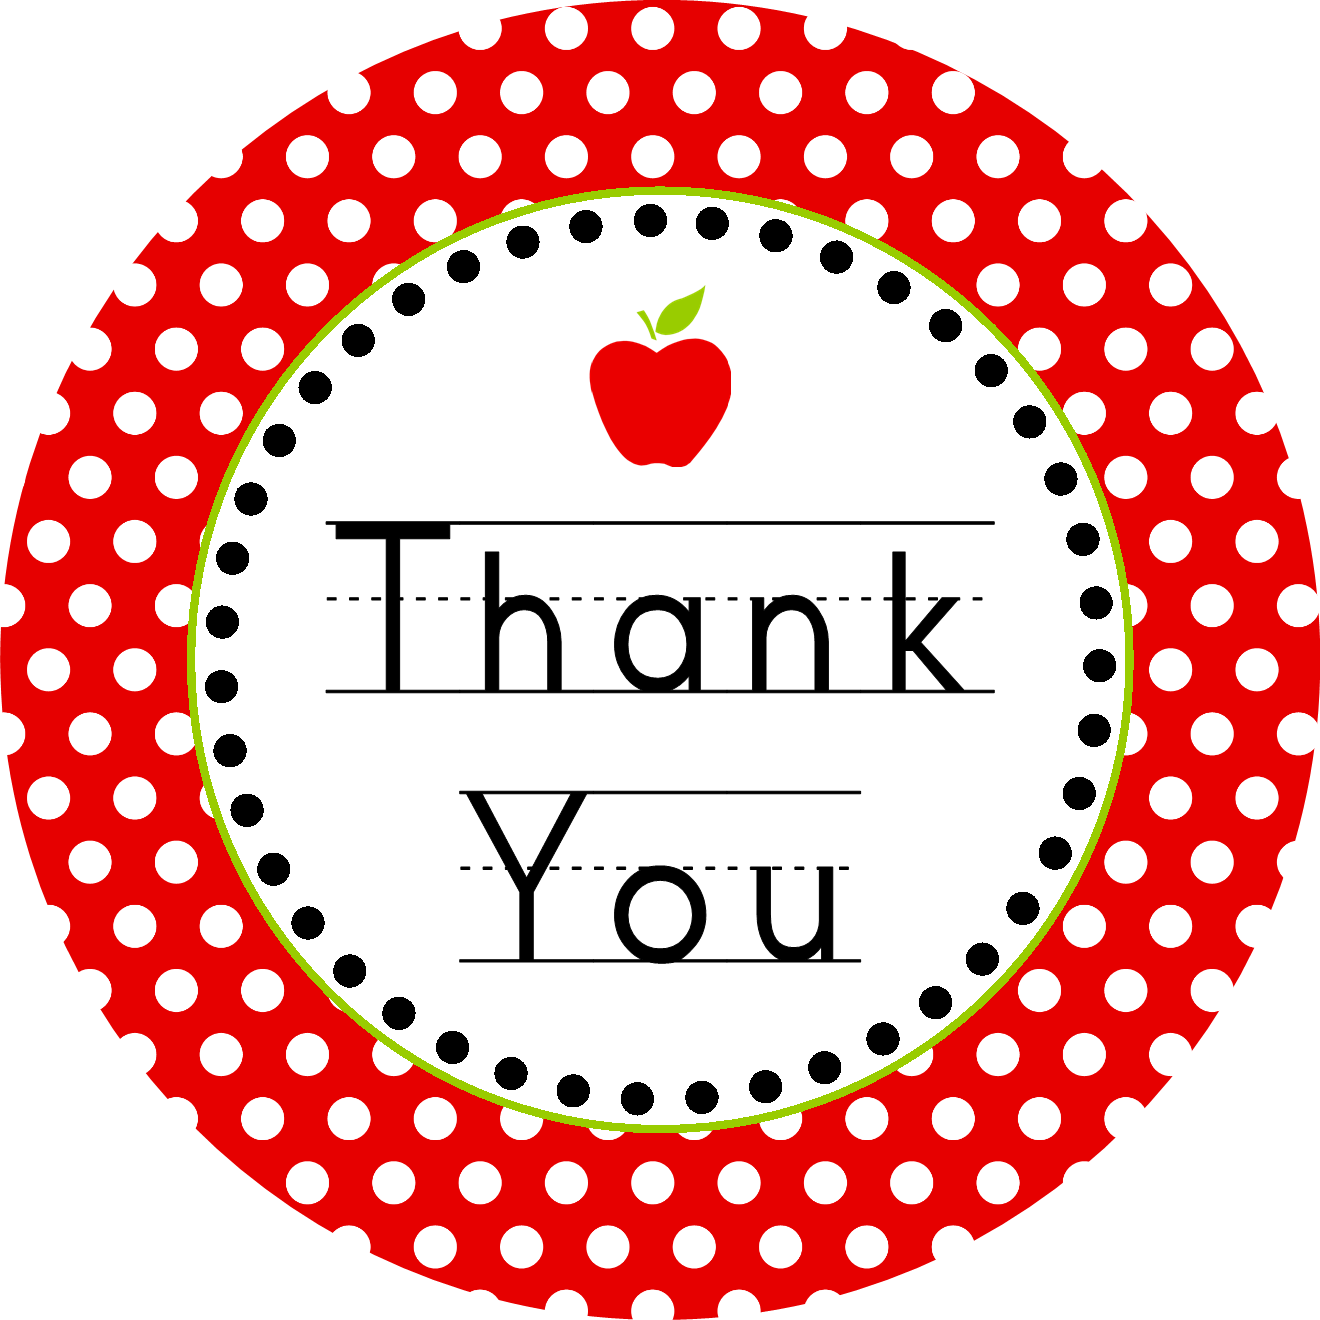 Thank You School | Clipart Panda - Free Clipart Images